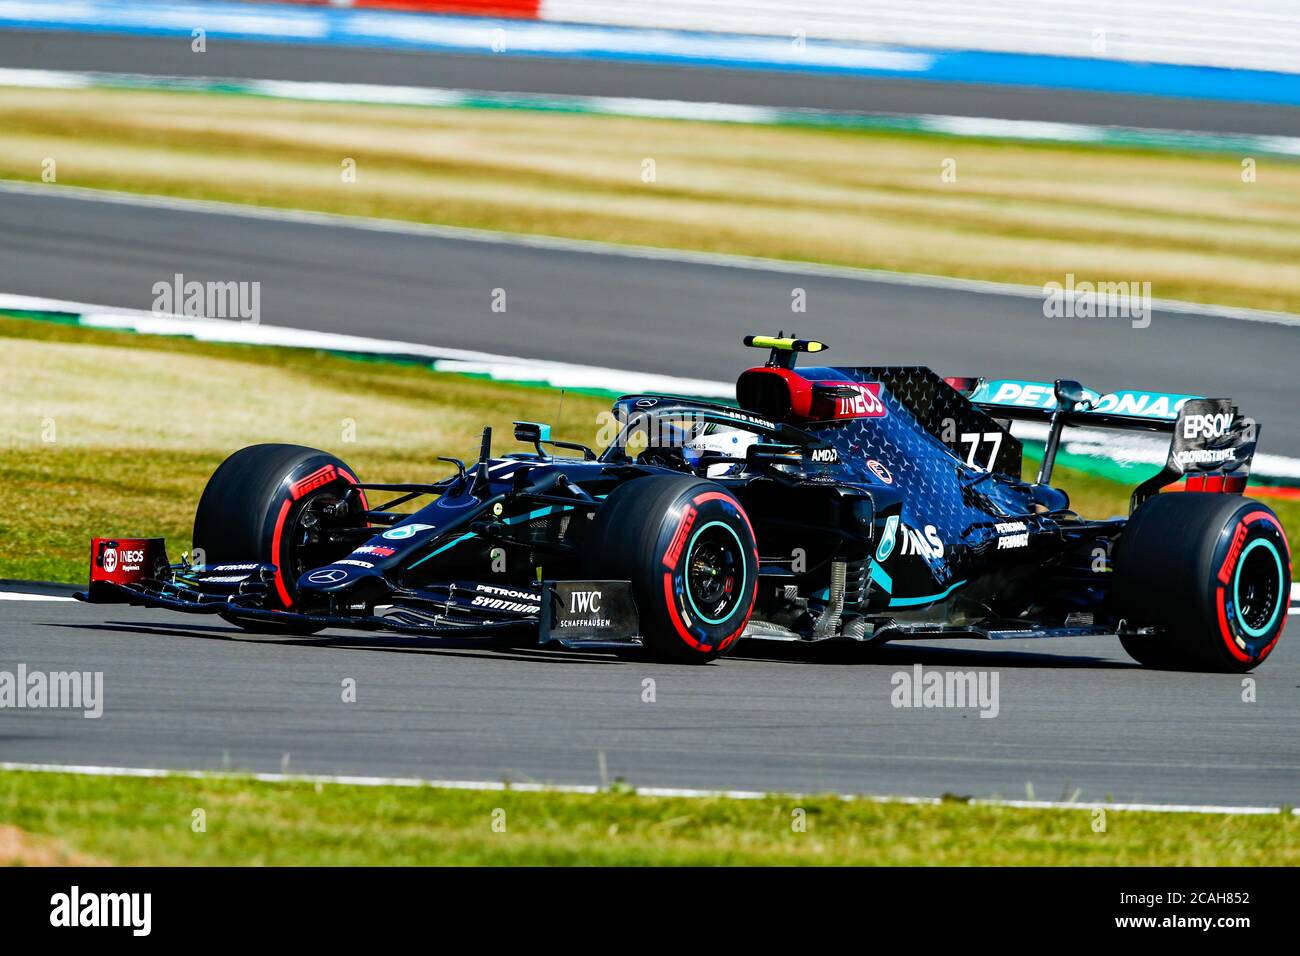 Mercedes driver Valtteri Bottas during the first practice session of the 70th Anniversary Formula One Grand Prix at Silverstone Race circuit, Northampton. Stock Photo